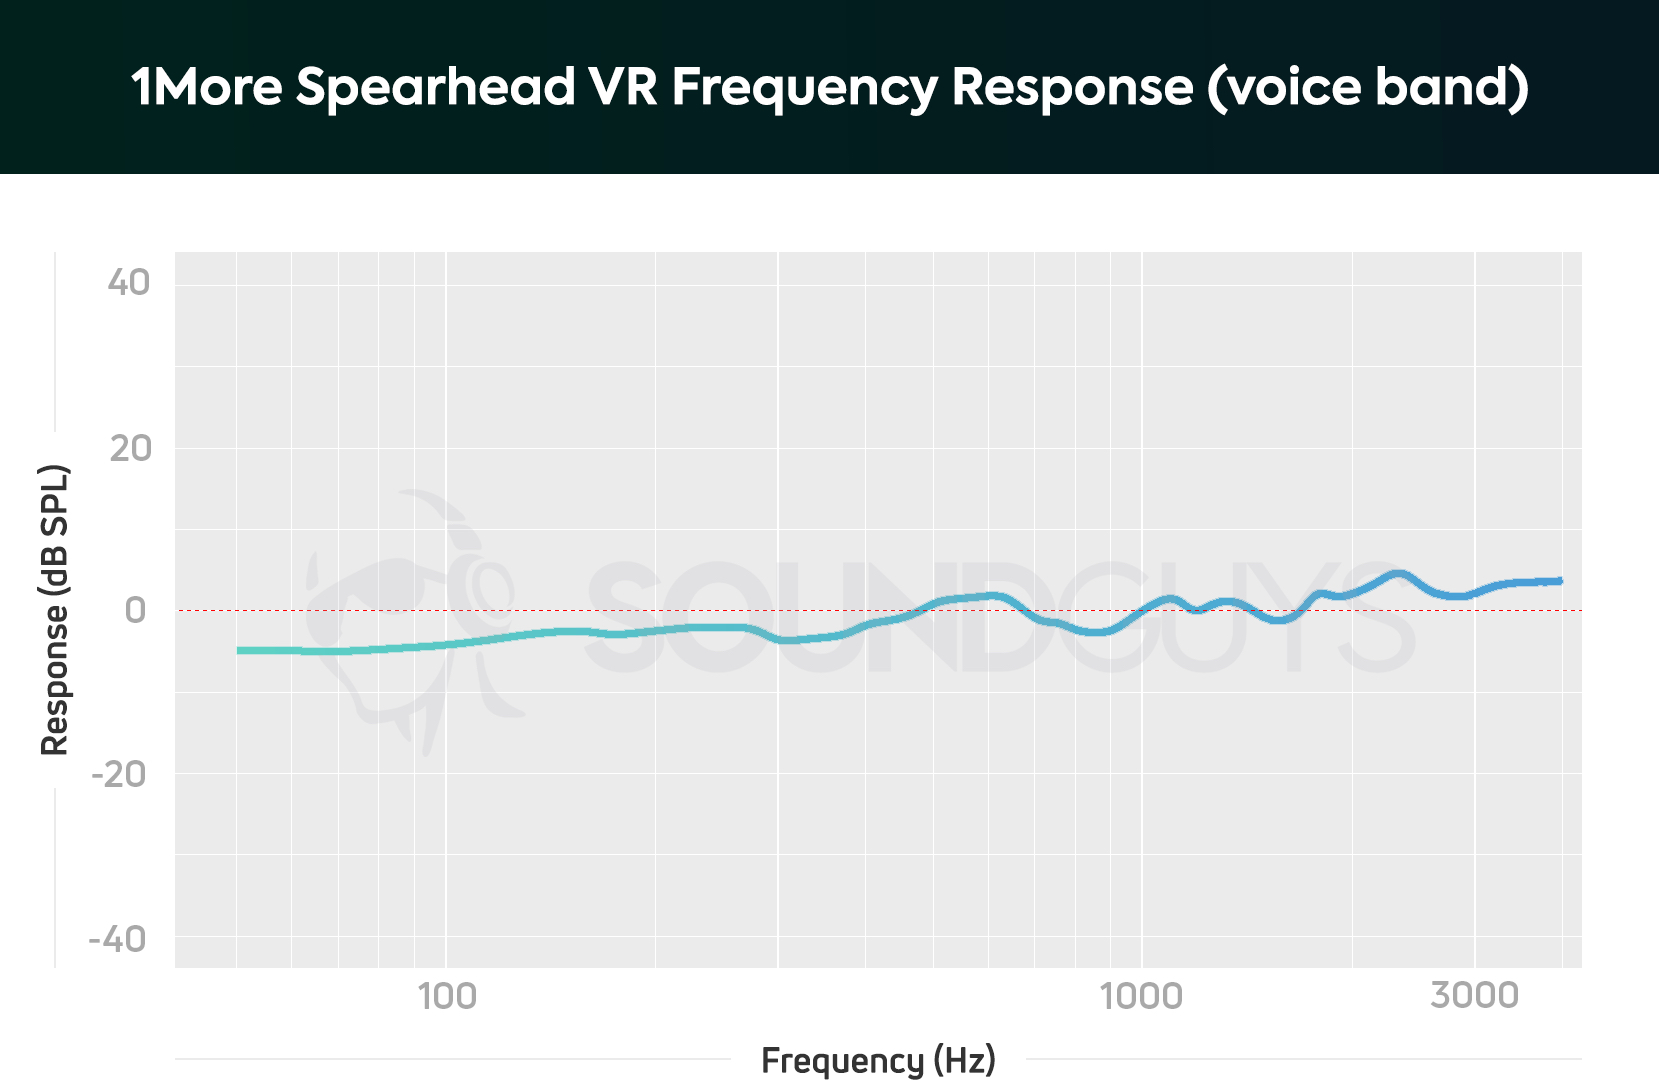 A frequency response chart for the 1More Spearhead VR gaming headset microphone, which shows very accurate audio output across the frequency spectrum.